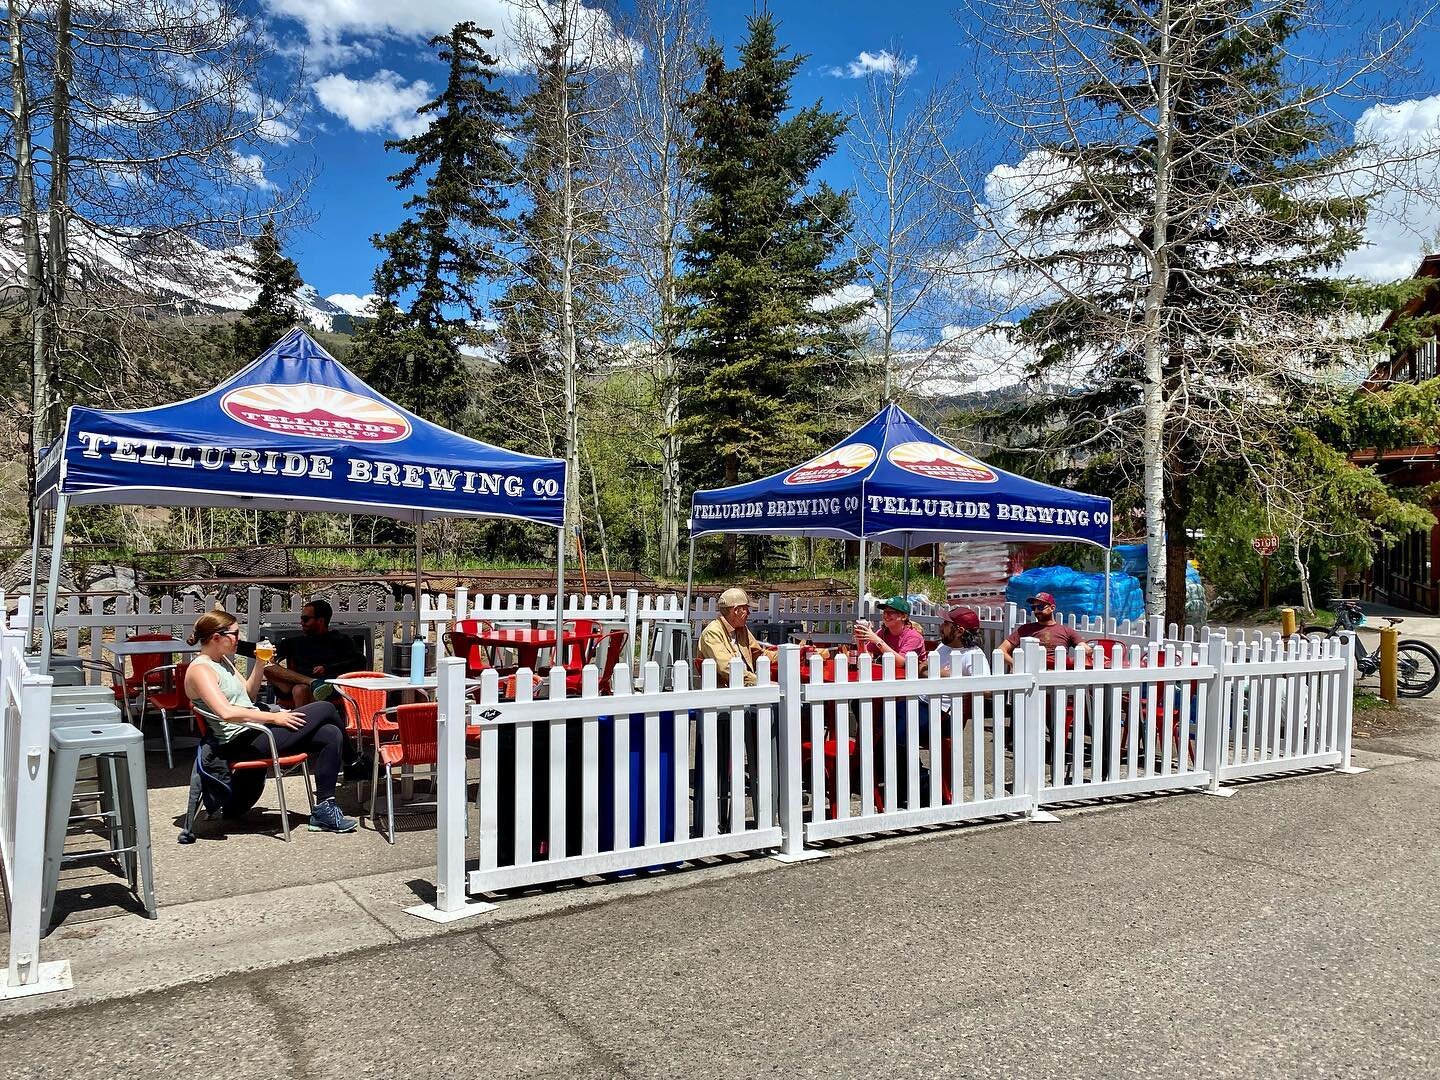 The Garden is open and so are we! Summer is officially here and we couldn&rsquo;t be more excited for burgers and beer in the sun! Bike, float, walk, or run to hurry up and slow down. Lawson Hill is just waiting to be your summer oasis! And as a spec